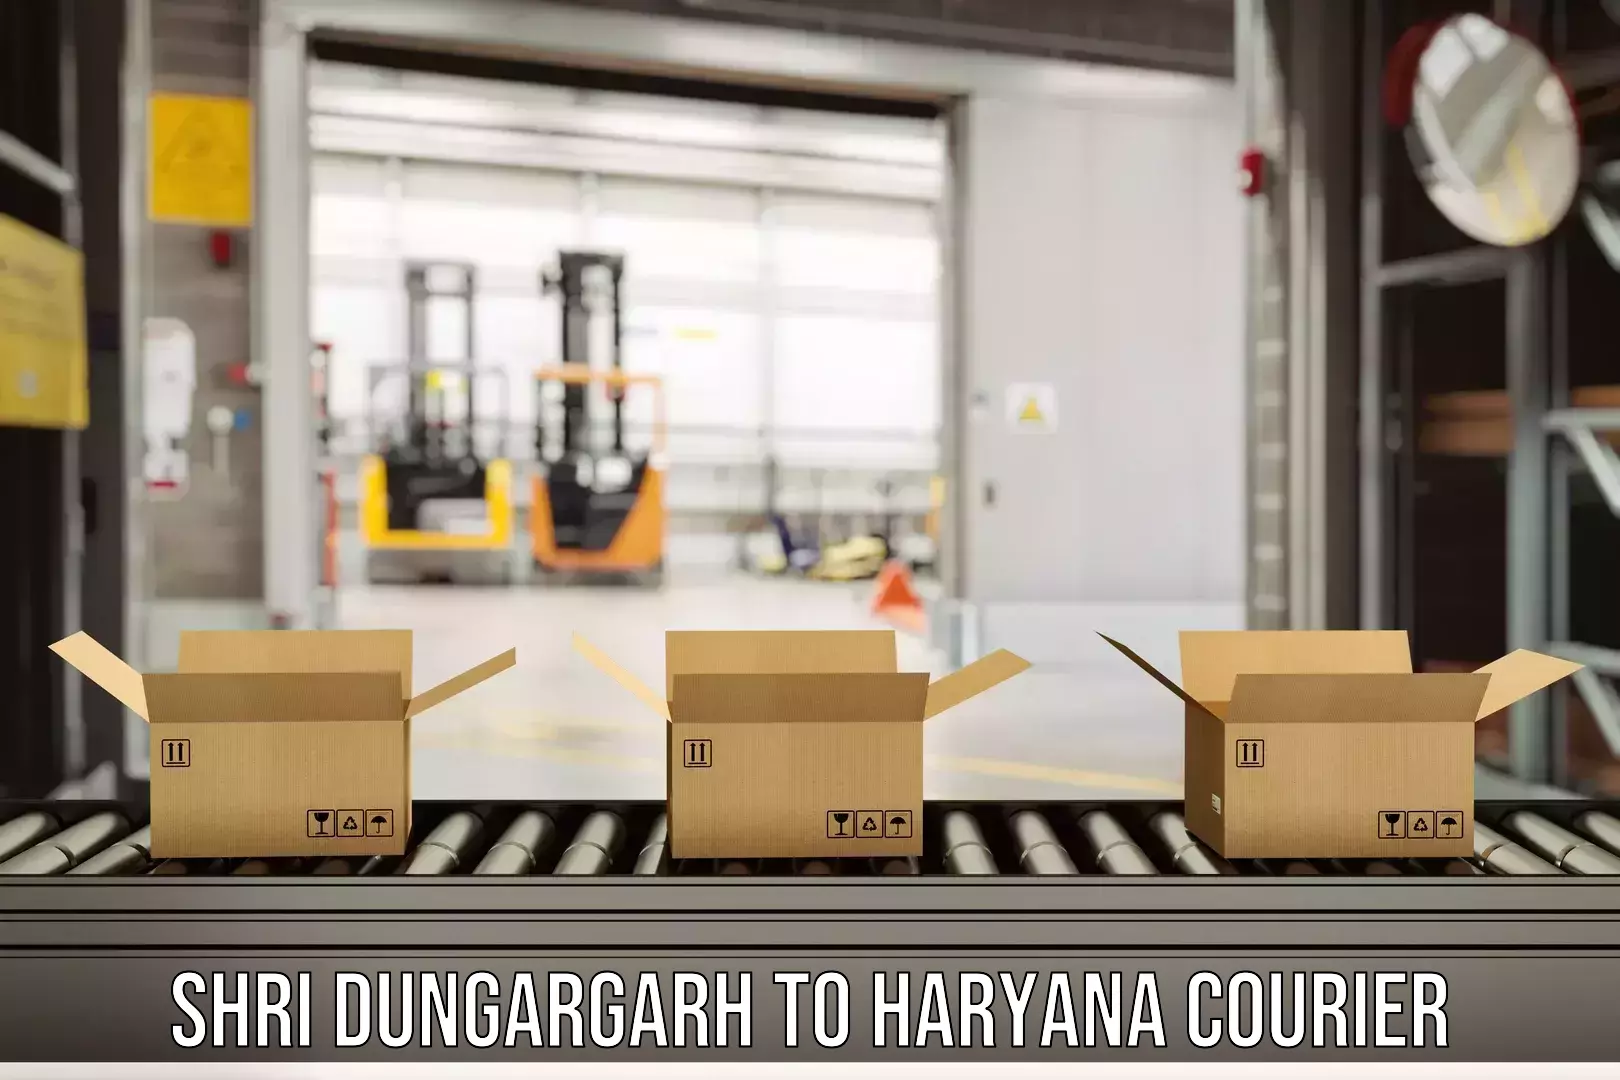 Same-day delivery solutions Shri Dungargarh to Panipat